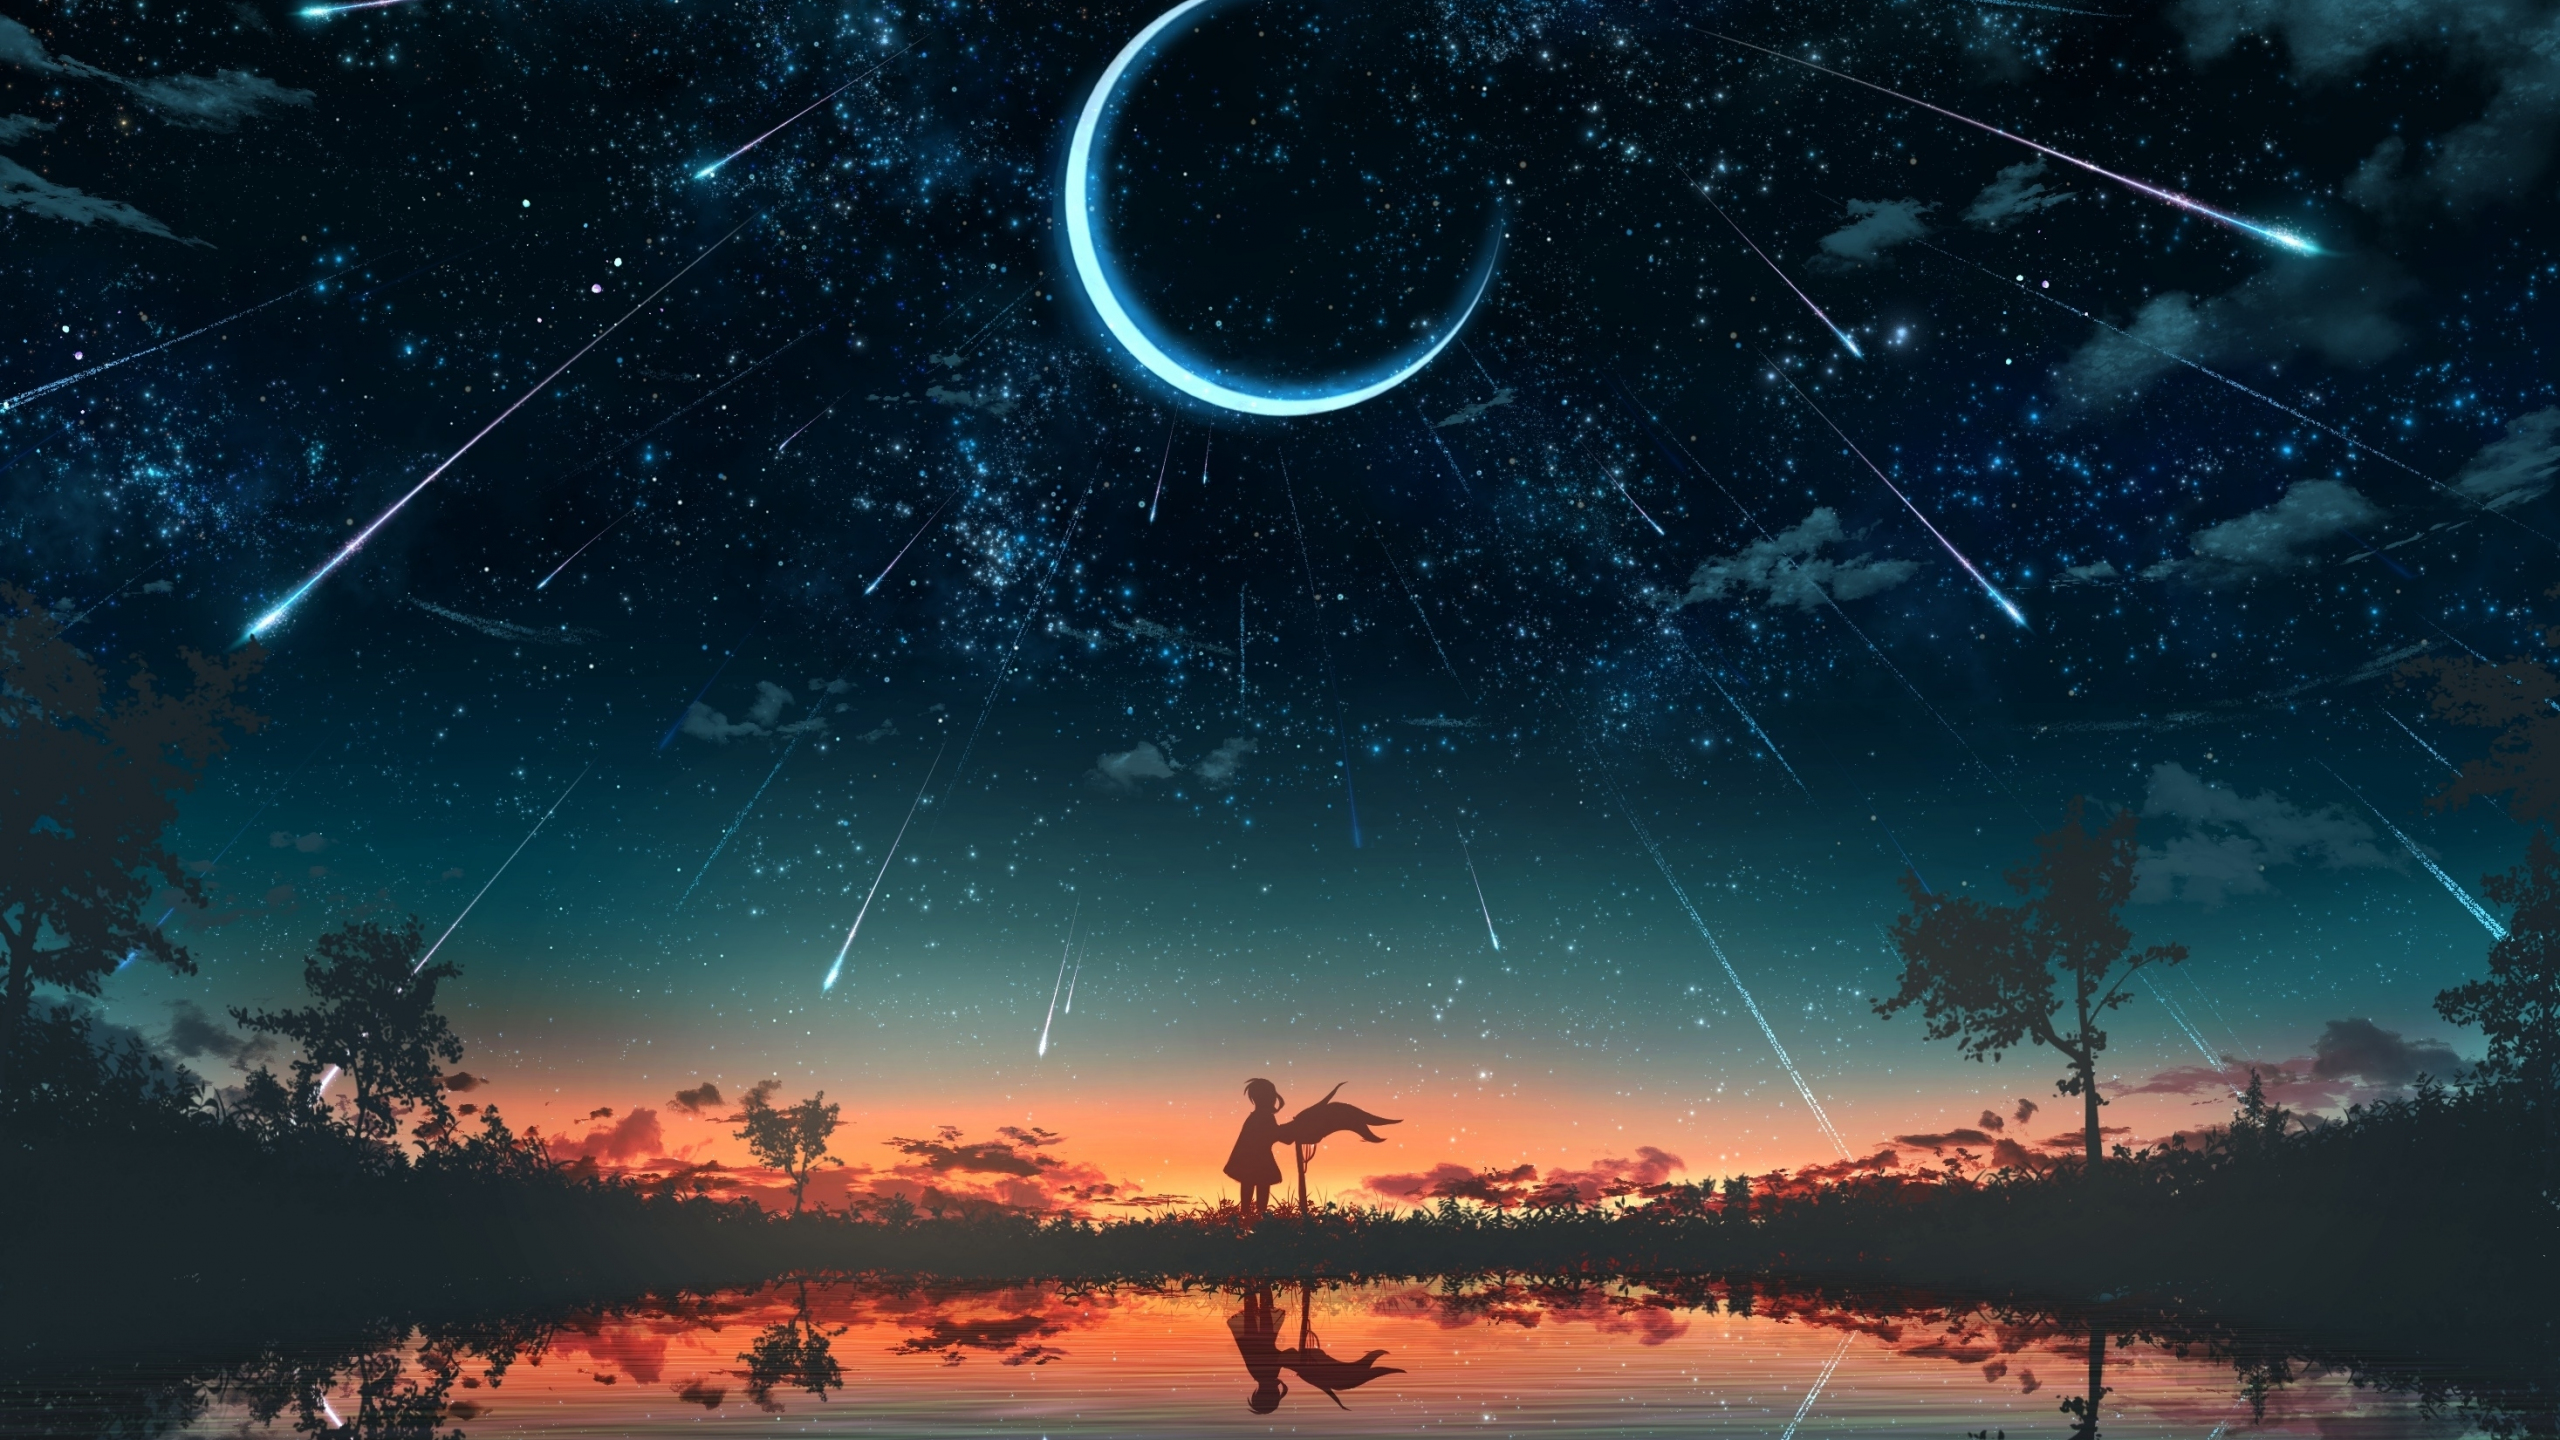 Wallpaper Anime Art Aesthetics Cloud Atmosphere Plant Background   Download Free Image